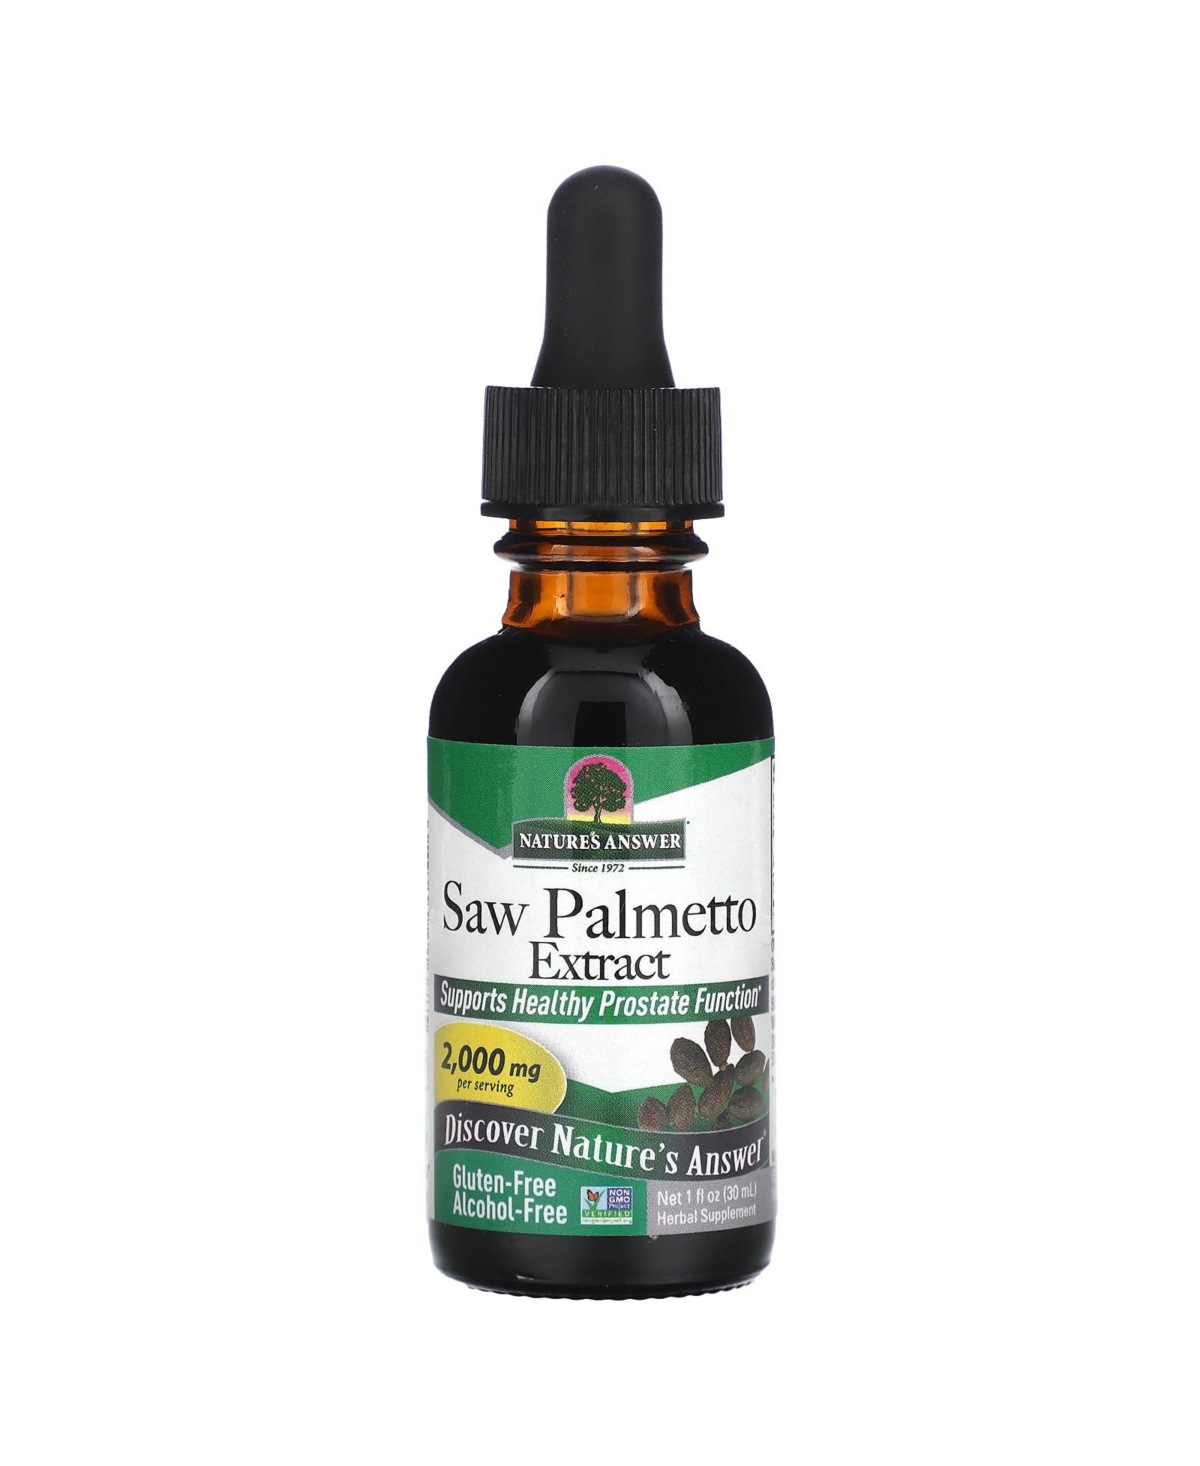 Saw Palmetto Extract Alcohol-Free 2 000 mg 1 fl oz (30 ml) (1 - 000 mg - Assorted Pre-pack (See Table